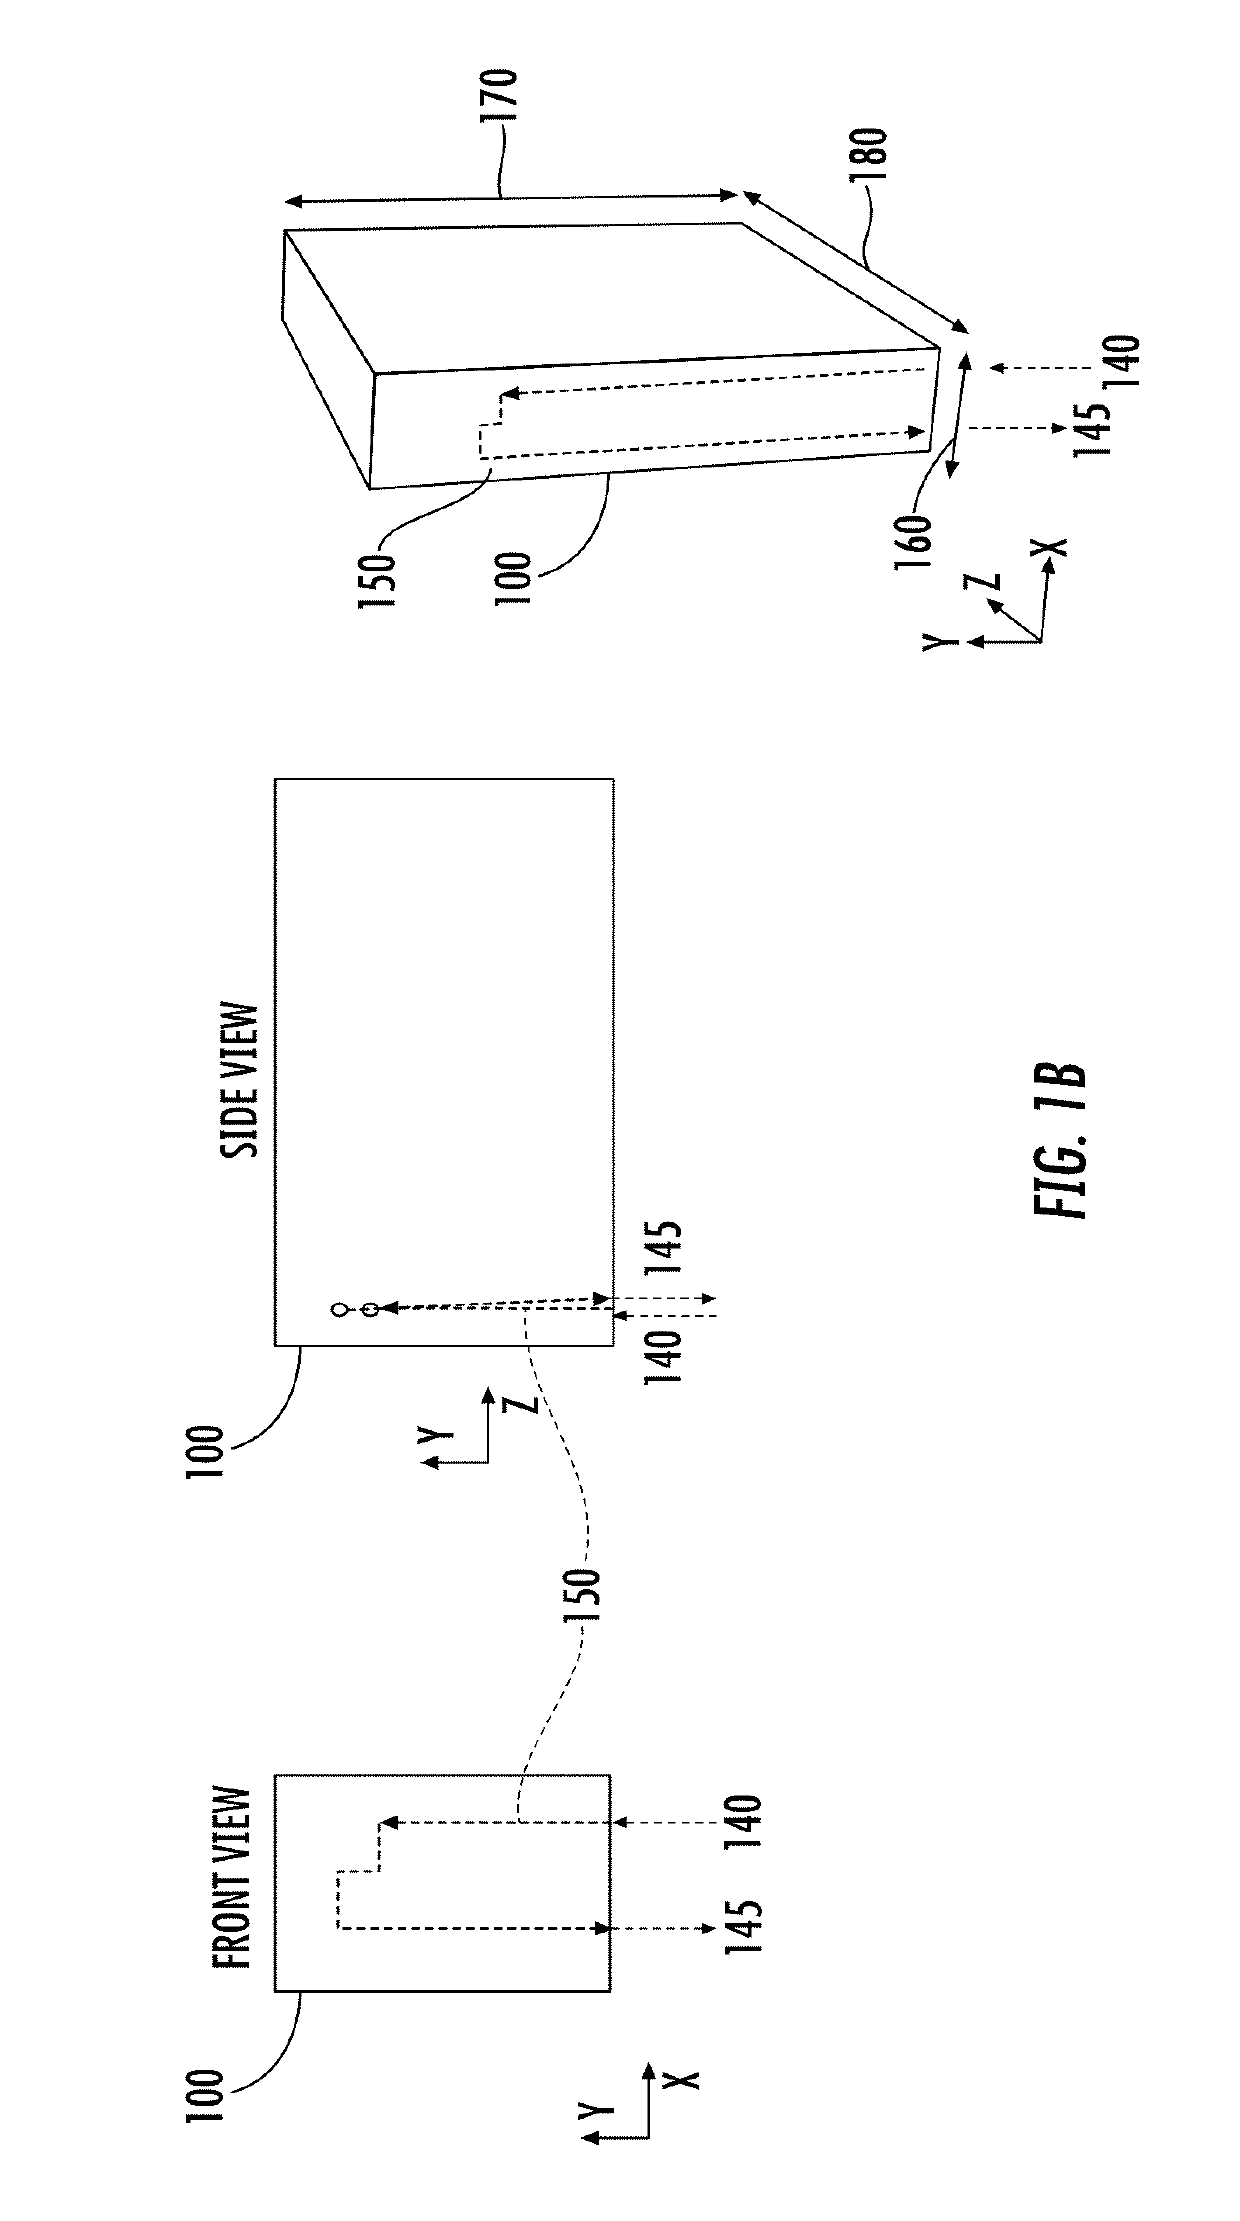 Microfluidic chip device for optical force measurements and cell imaging using microfluidic chip configuration and dynamics